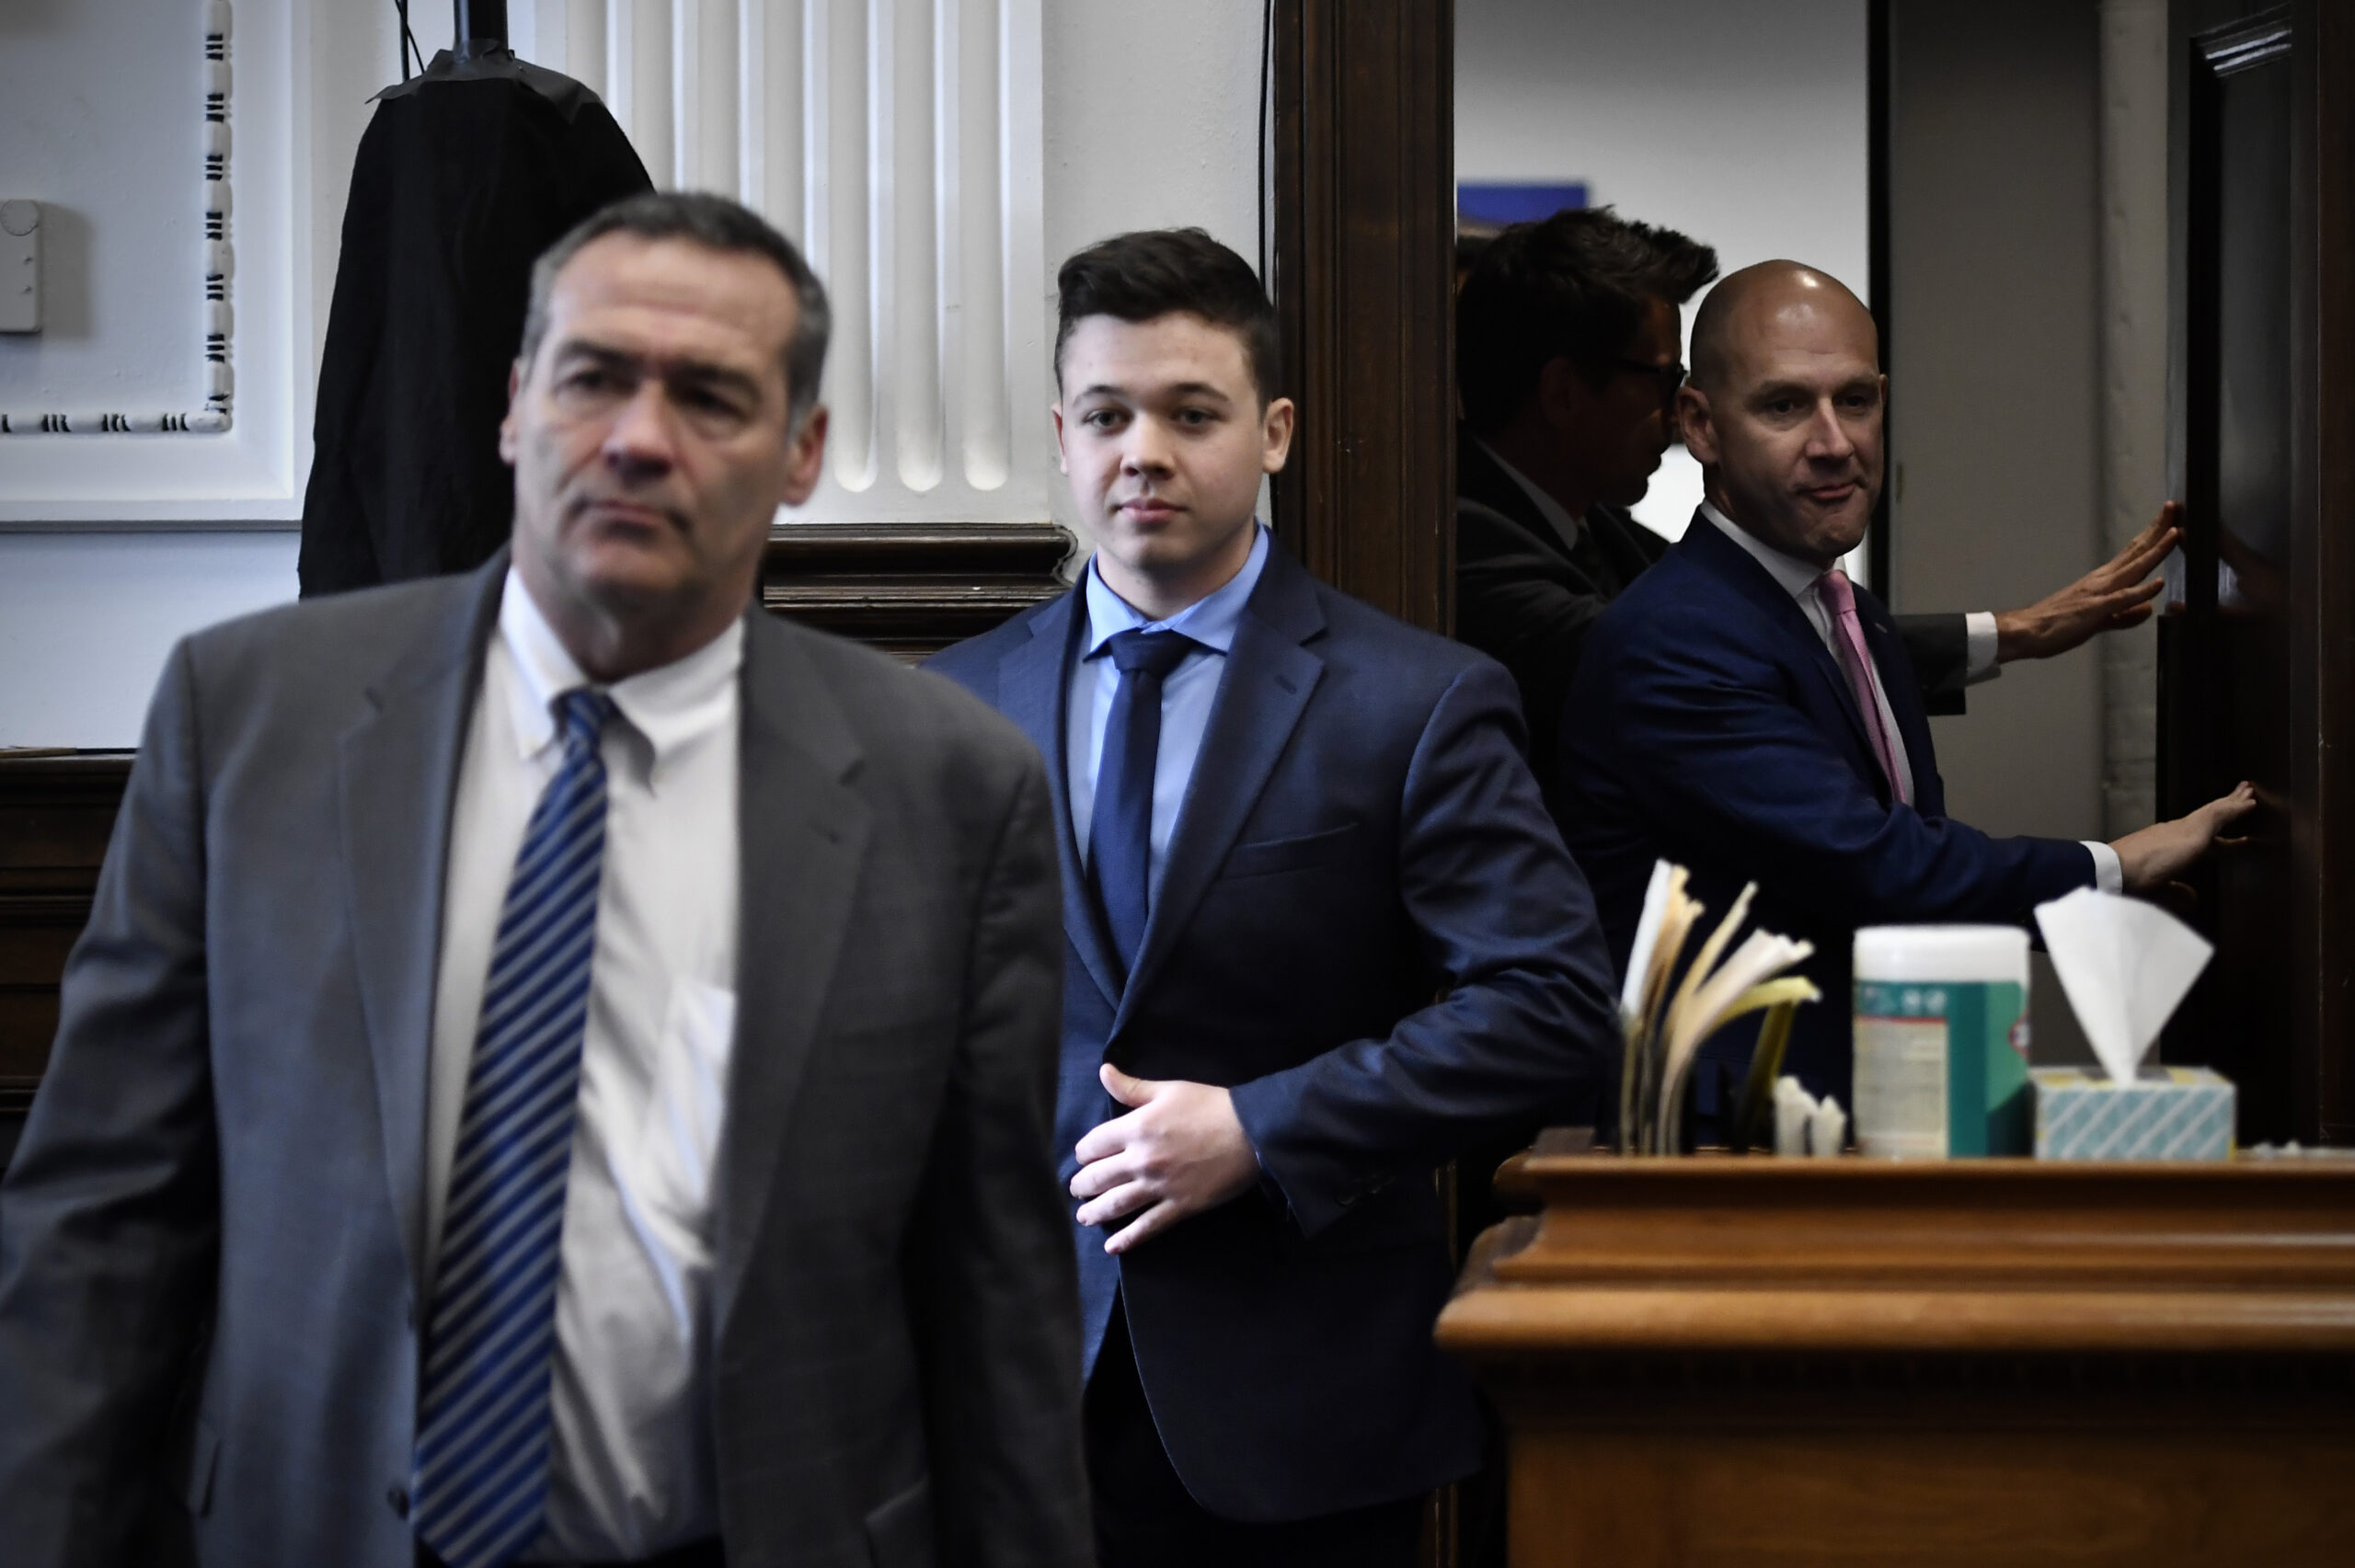 Kyle Rittenhouse, center, enters the courtroom with his attorneys Mark Richards, left, and Corey Chirafisi for a meeting called by Judge Bruce Schroeder at the Kenosha County Courthouse in Kenosha, Wis., on Thursday, Nov. 18, 2021. (Sean Krajacic/The Kenosha News via AP, Pool)